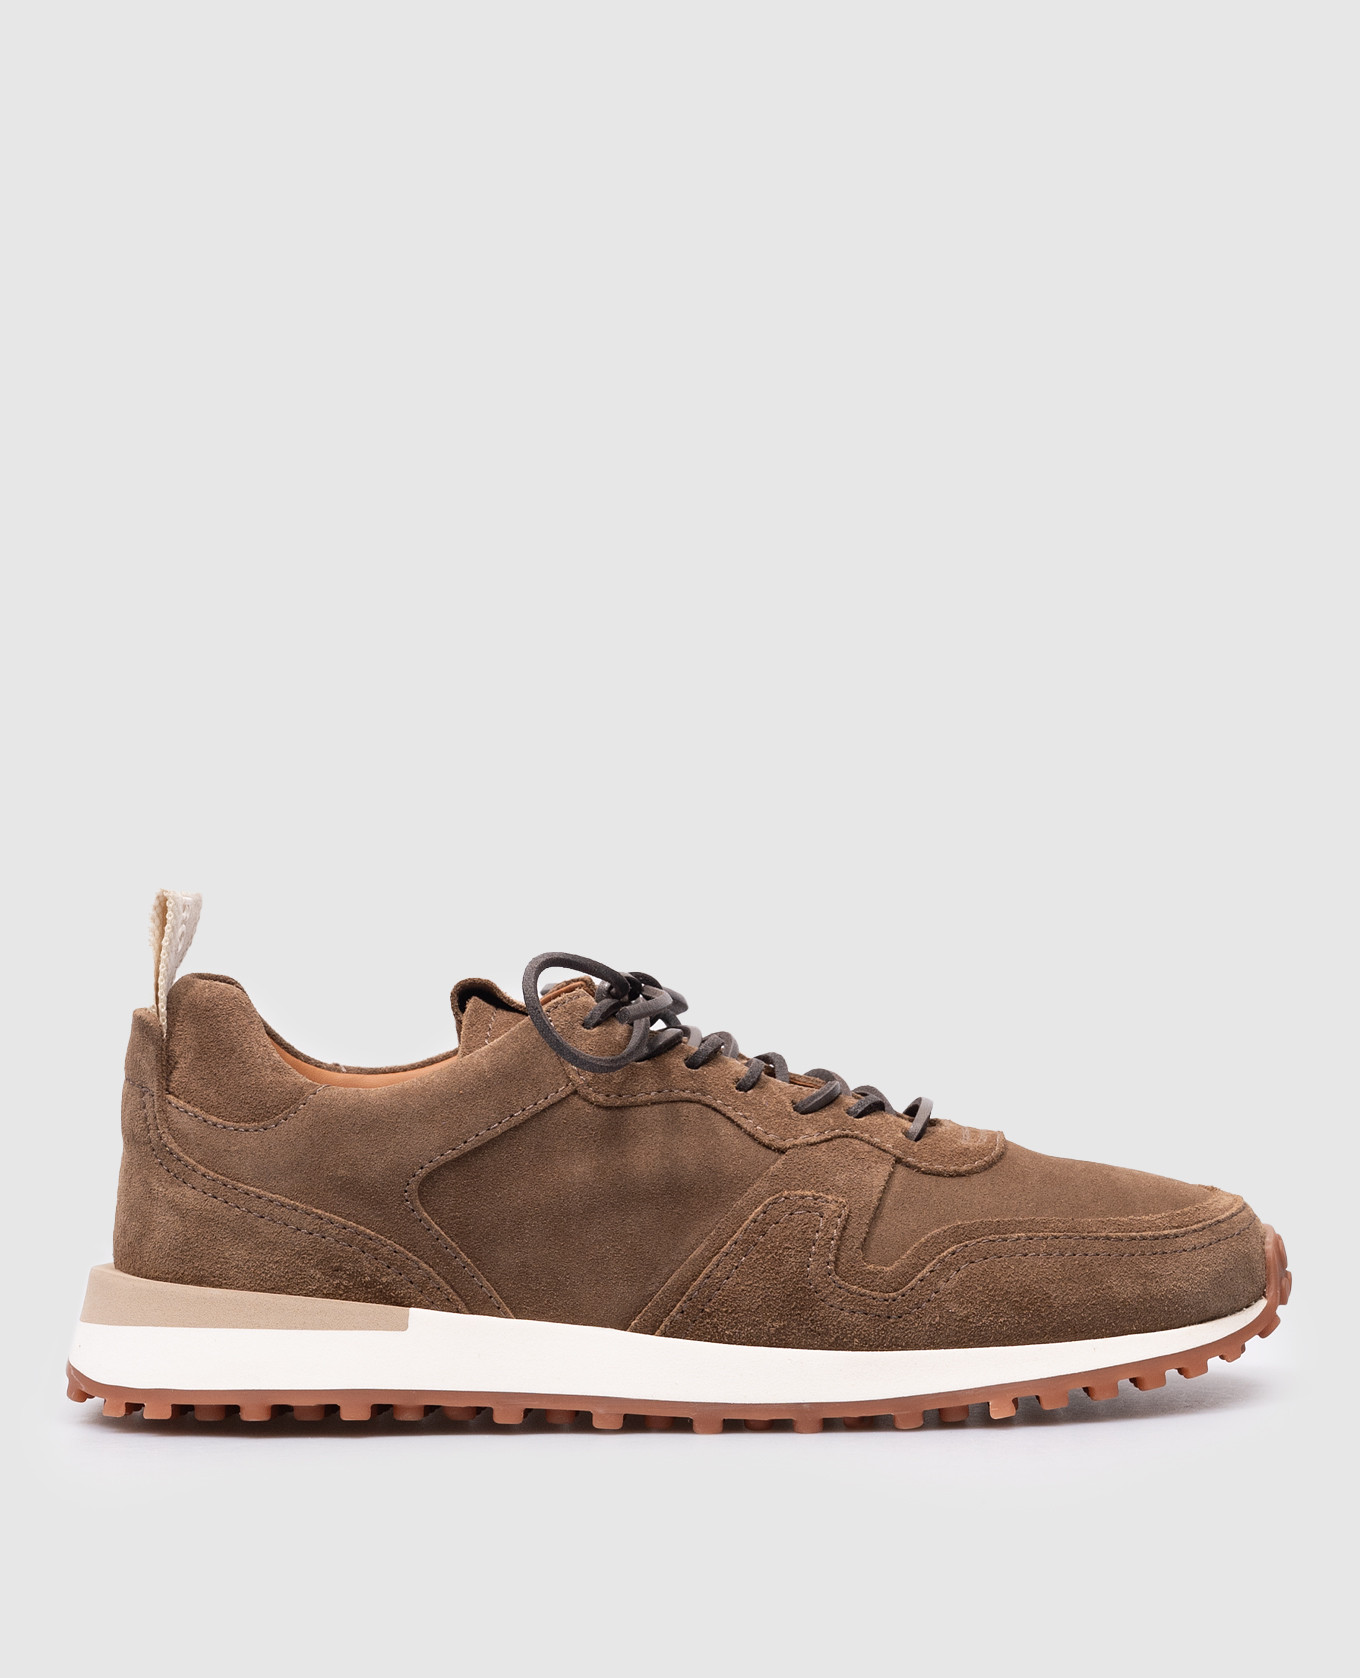 Brown suede FUTURA sneakers with logo